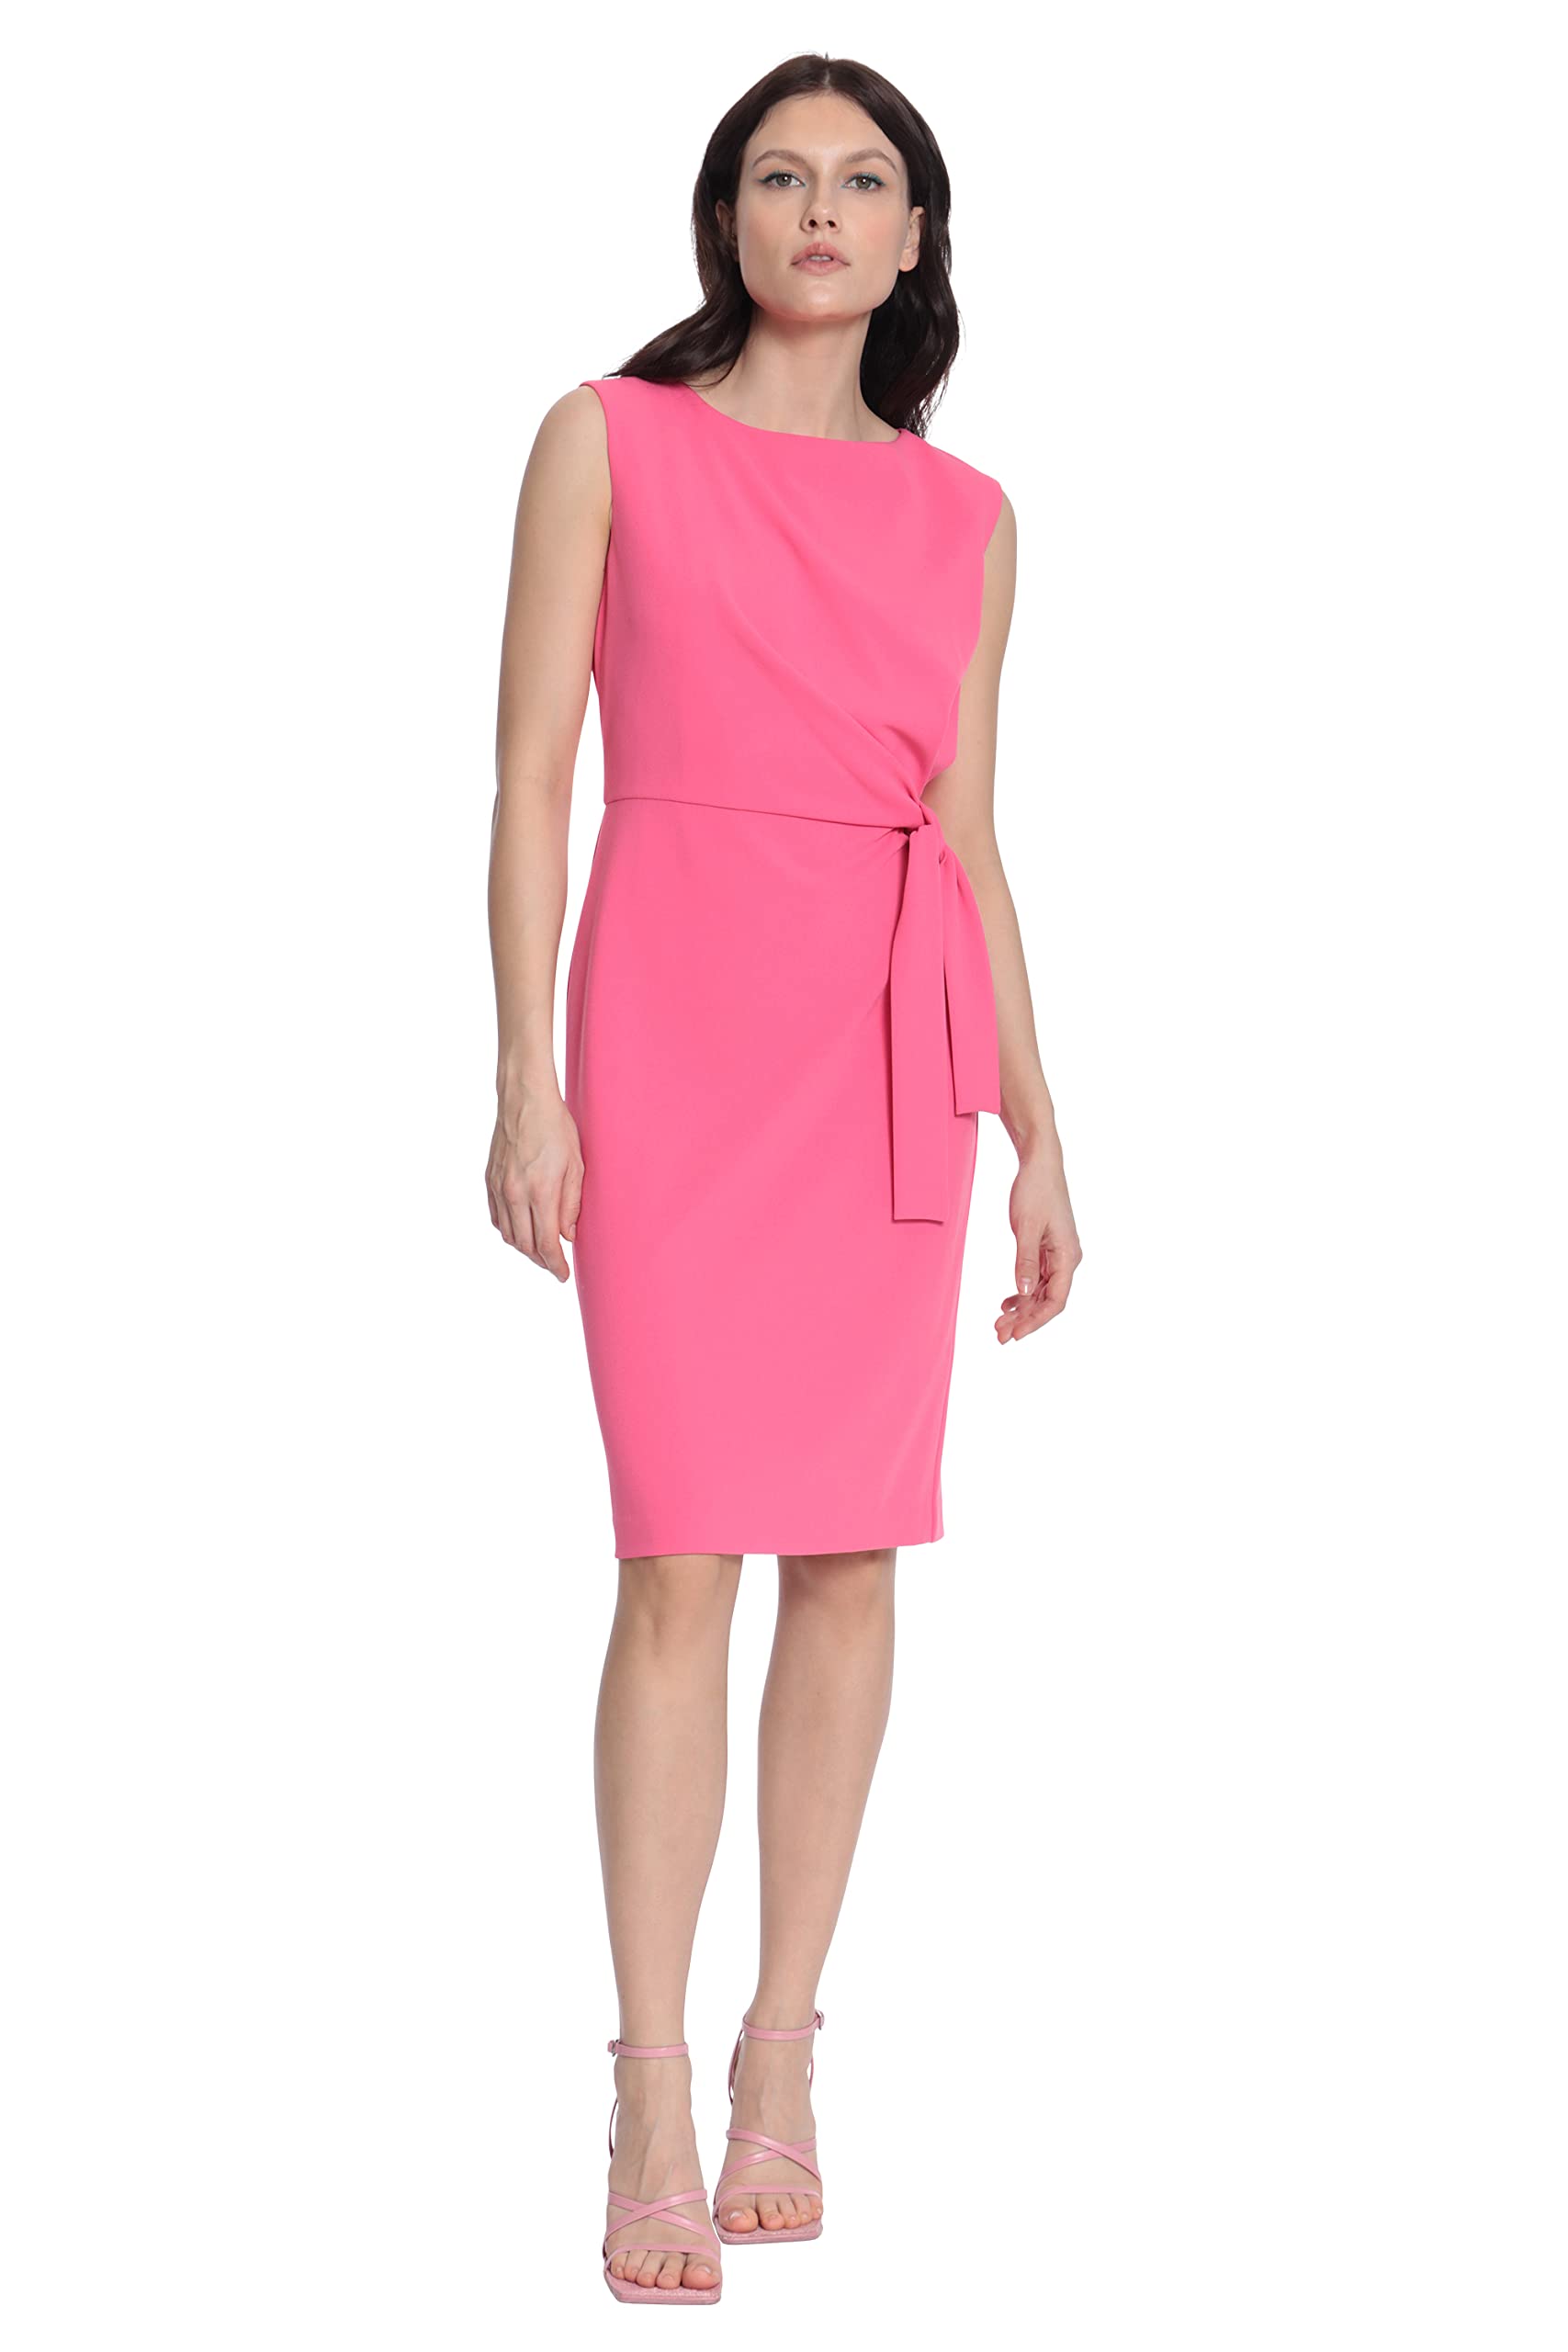 Donna Morgan Women's Petite Sleeveless Boatneck Side Gathering and Tie Dress